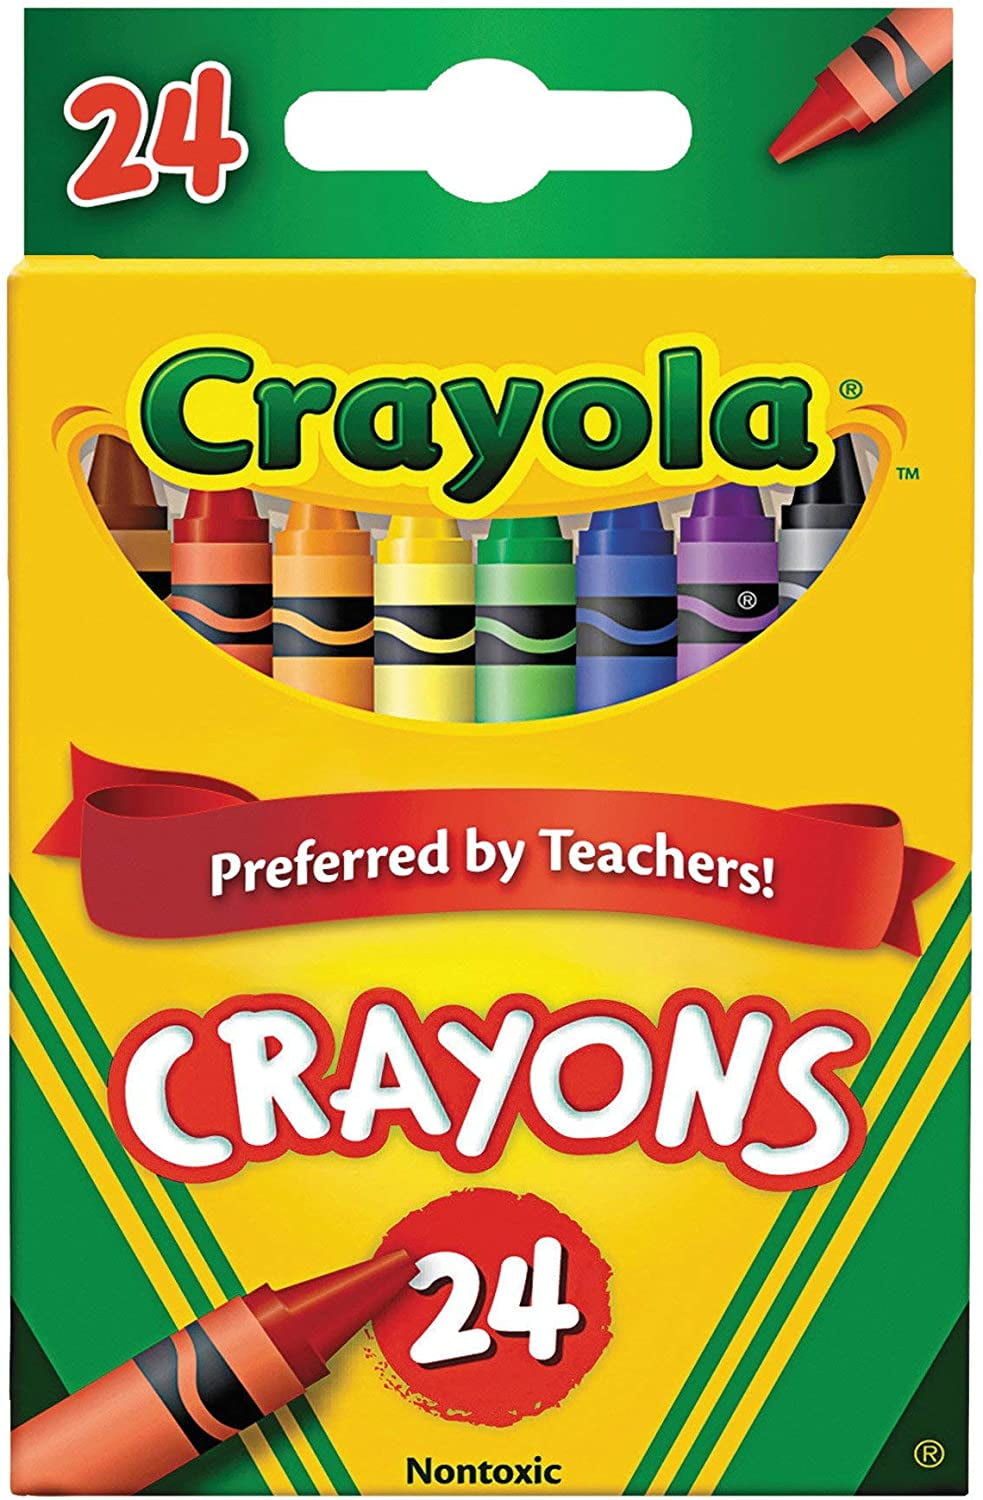 School Smart Non-Toxic Regular Crayon in Tuck Box, 5/16 x 3-1/2 in, Assorted Color, Pack of 16